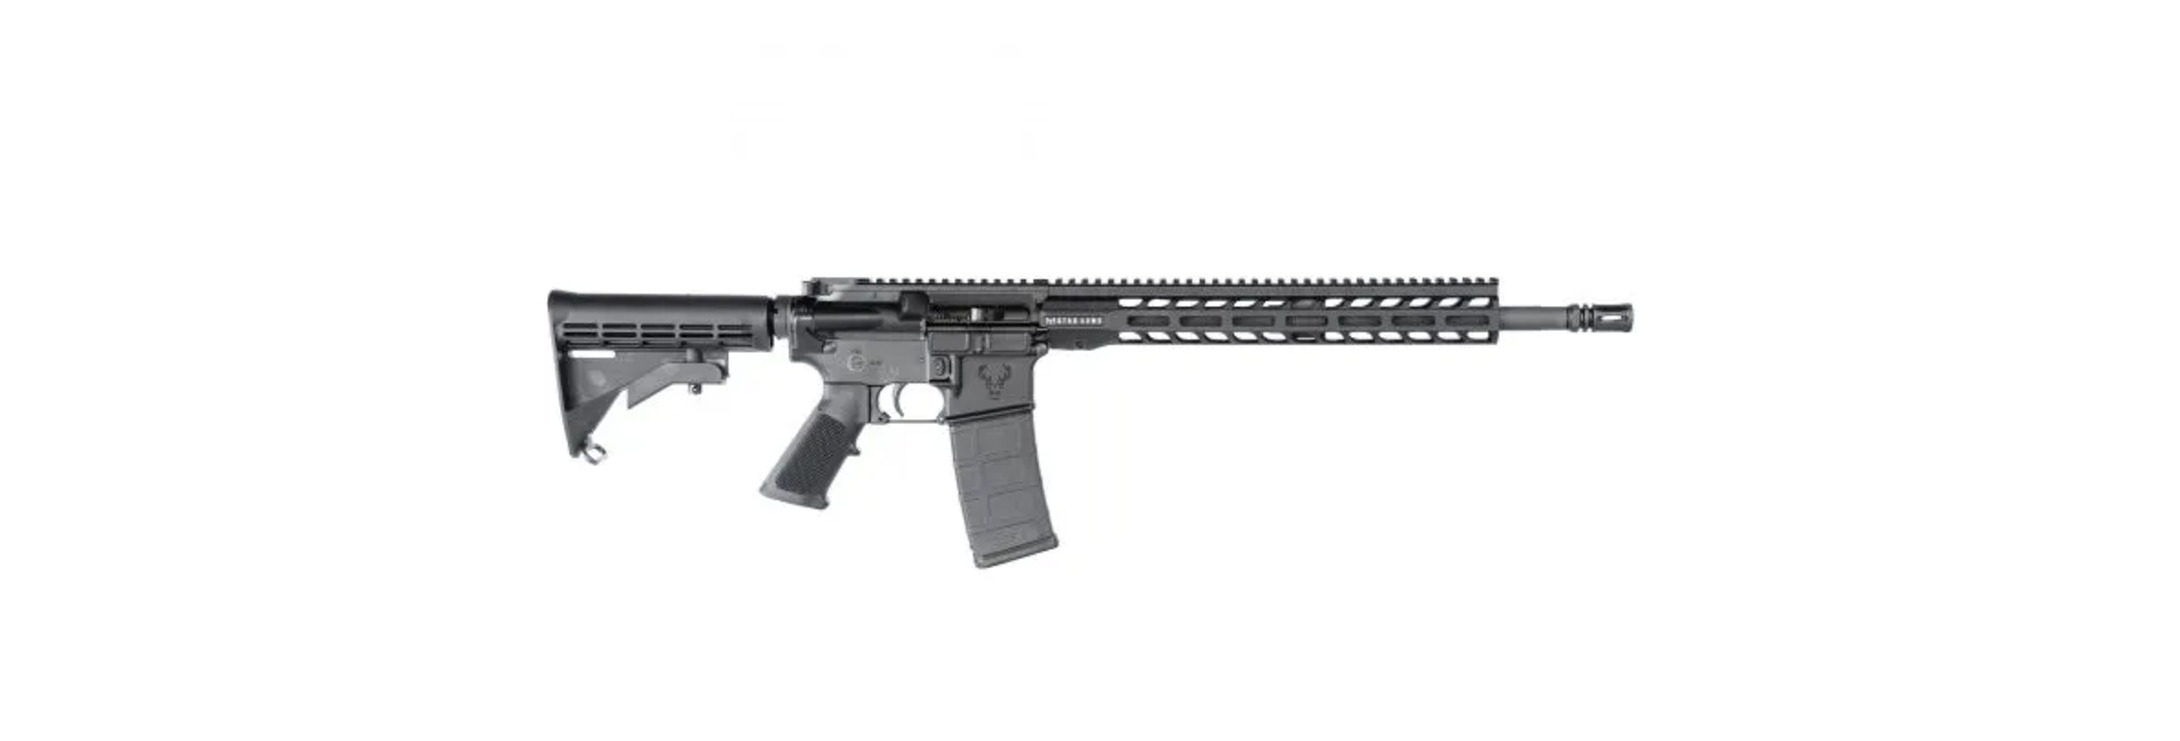 STAG ARMS STAG-15 W/ VORTEX OPTIC (CODE W0046499)-image